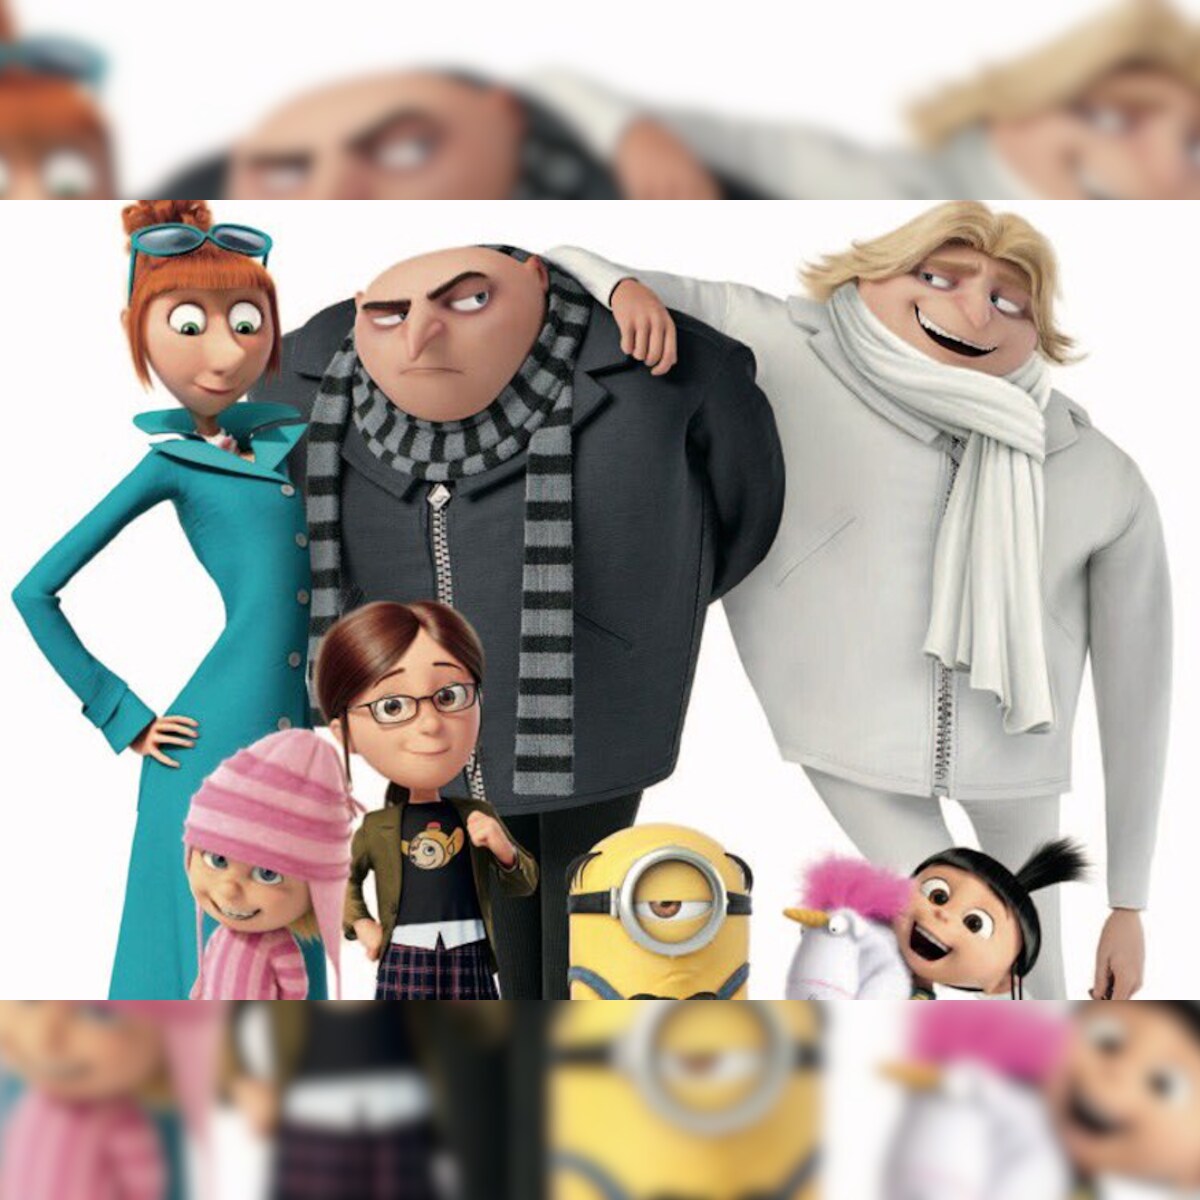 Despicable Me 3 New Trailer Introduces Gru S Twin Brother And A Minion Rebellion